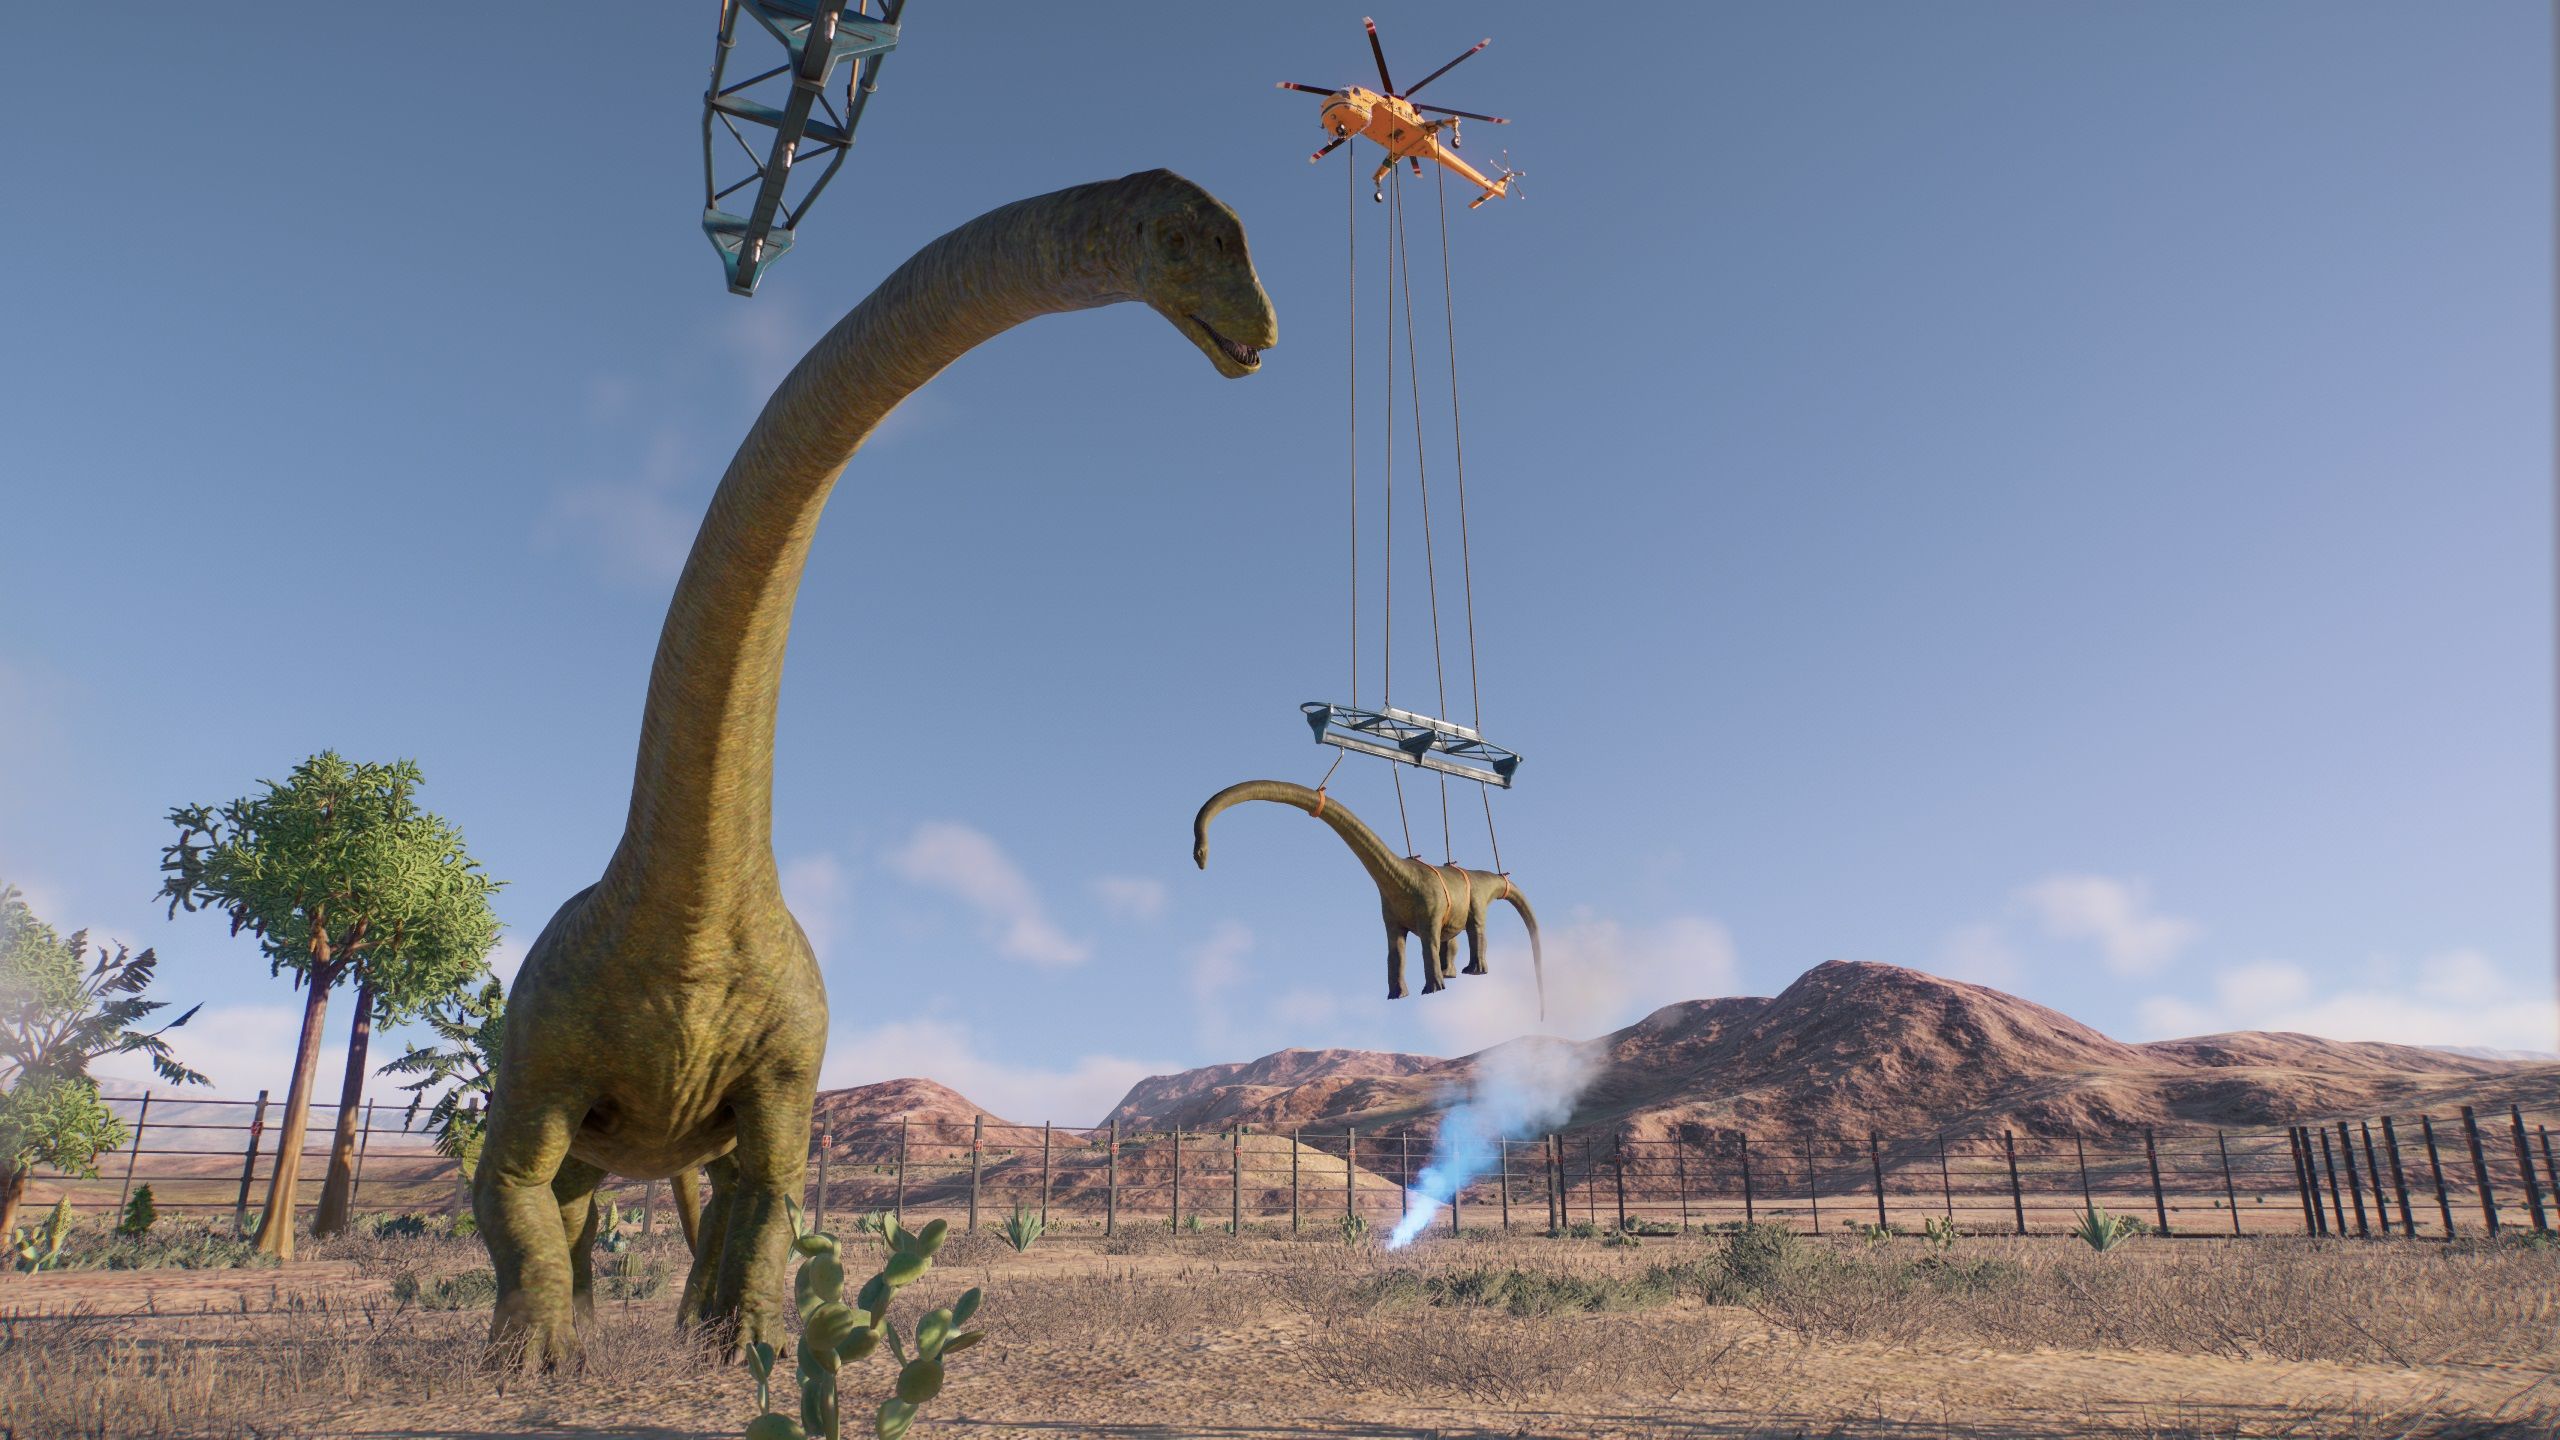 A Long-Necked Dinosaur Gets Airlifted Into An Enclosure